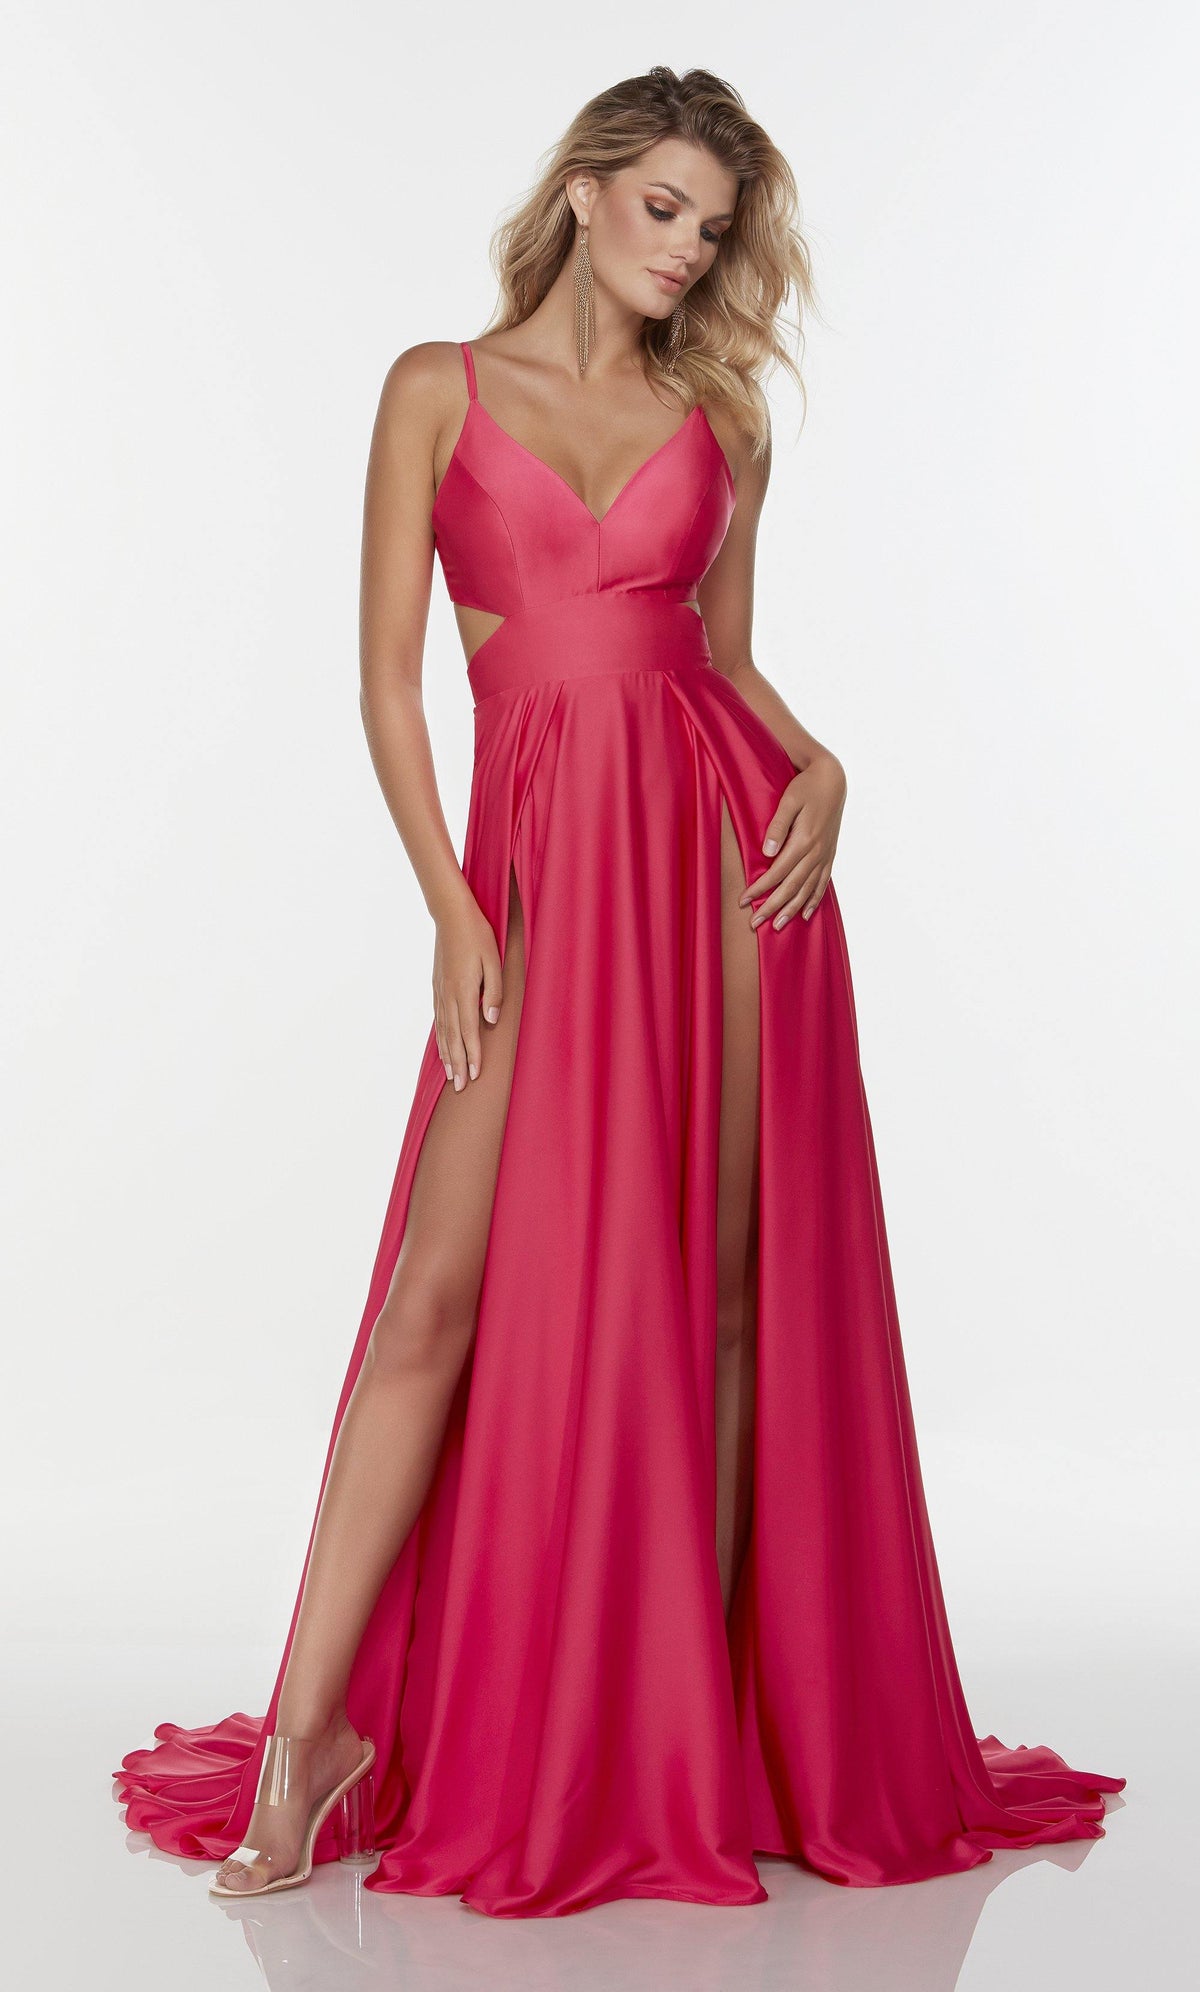 Long hot pink prom dress with a v neckline, side cut outs, and dual slits.